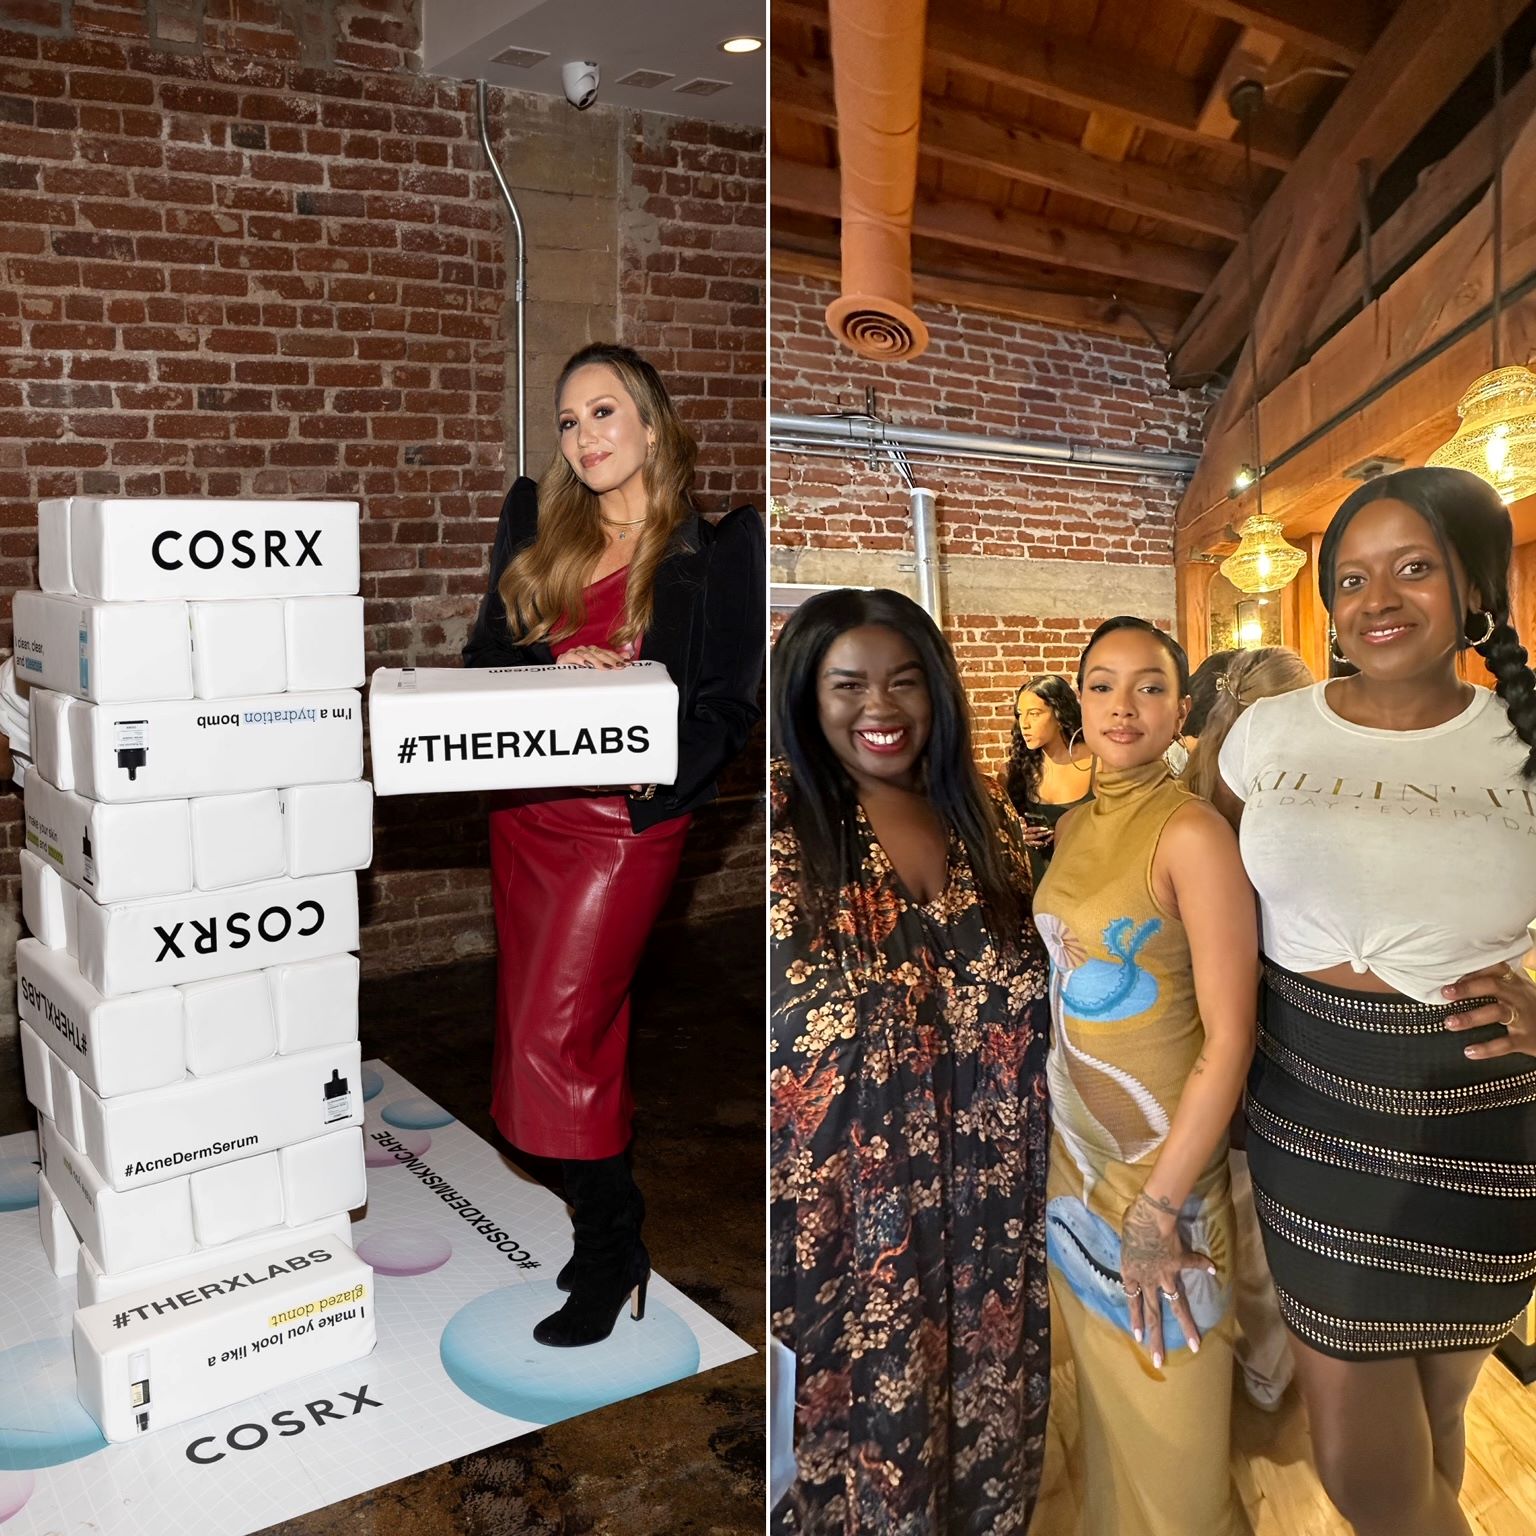 AN image of  Cheryl Burke and Karrueche Tran at The RX Labs hosted by COSRX in Hollywood, CA.